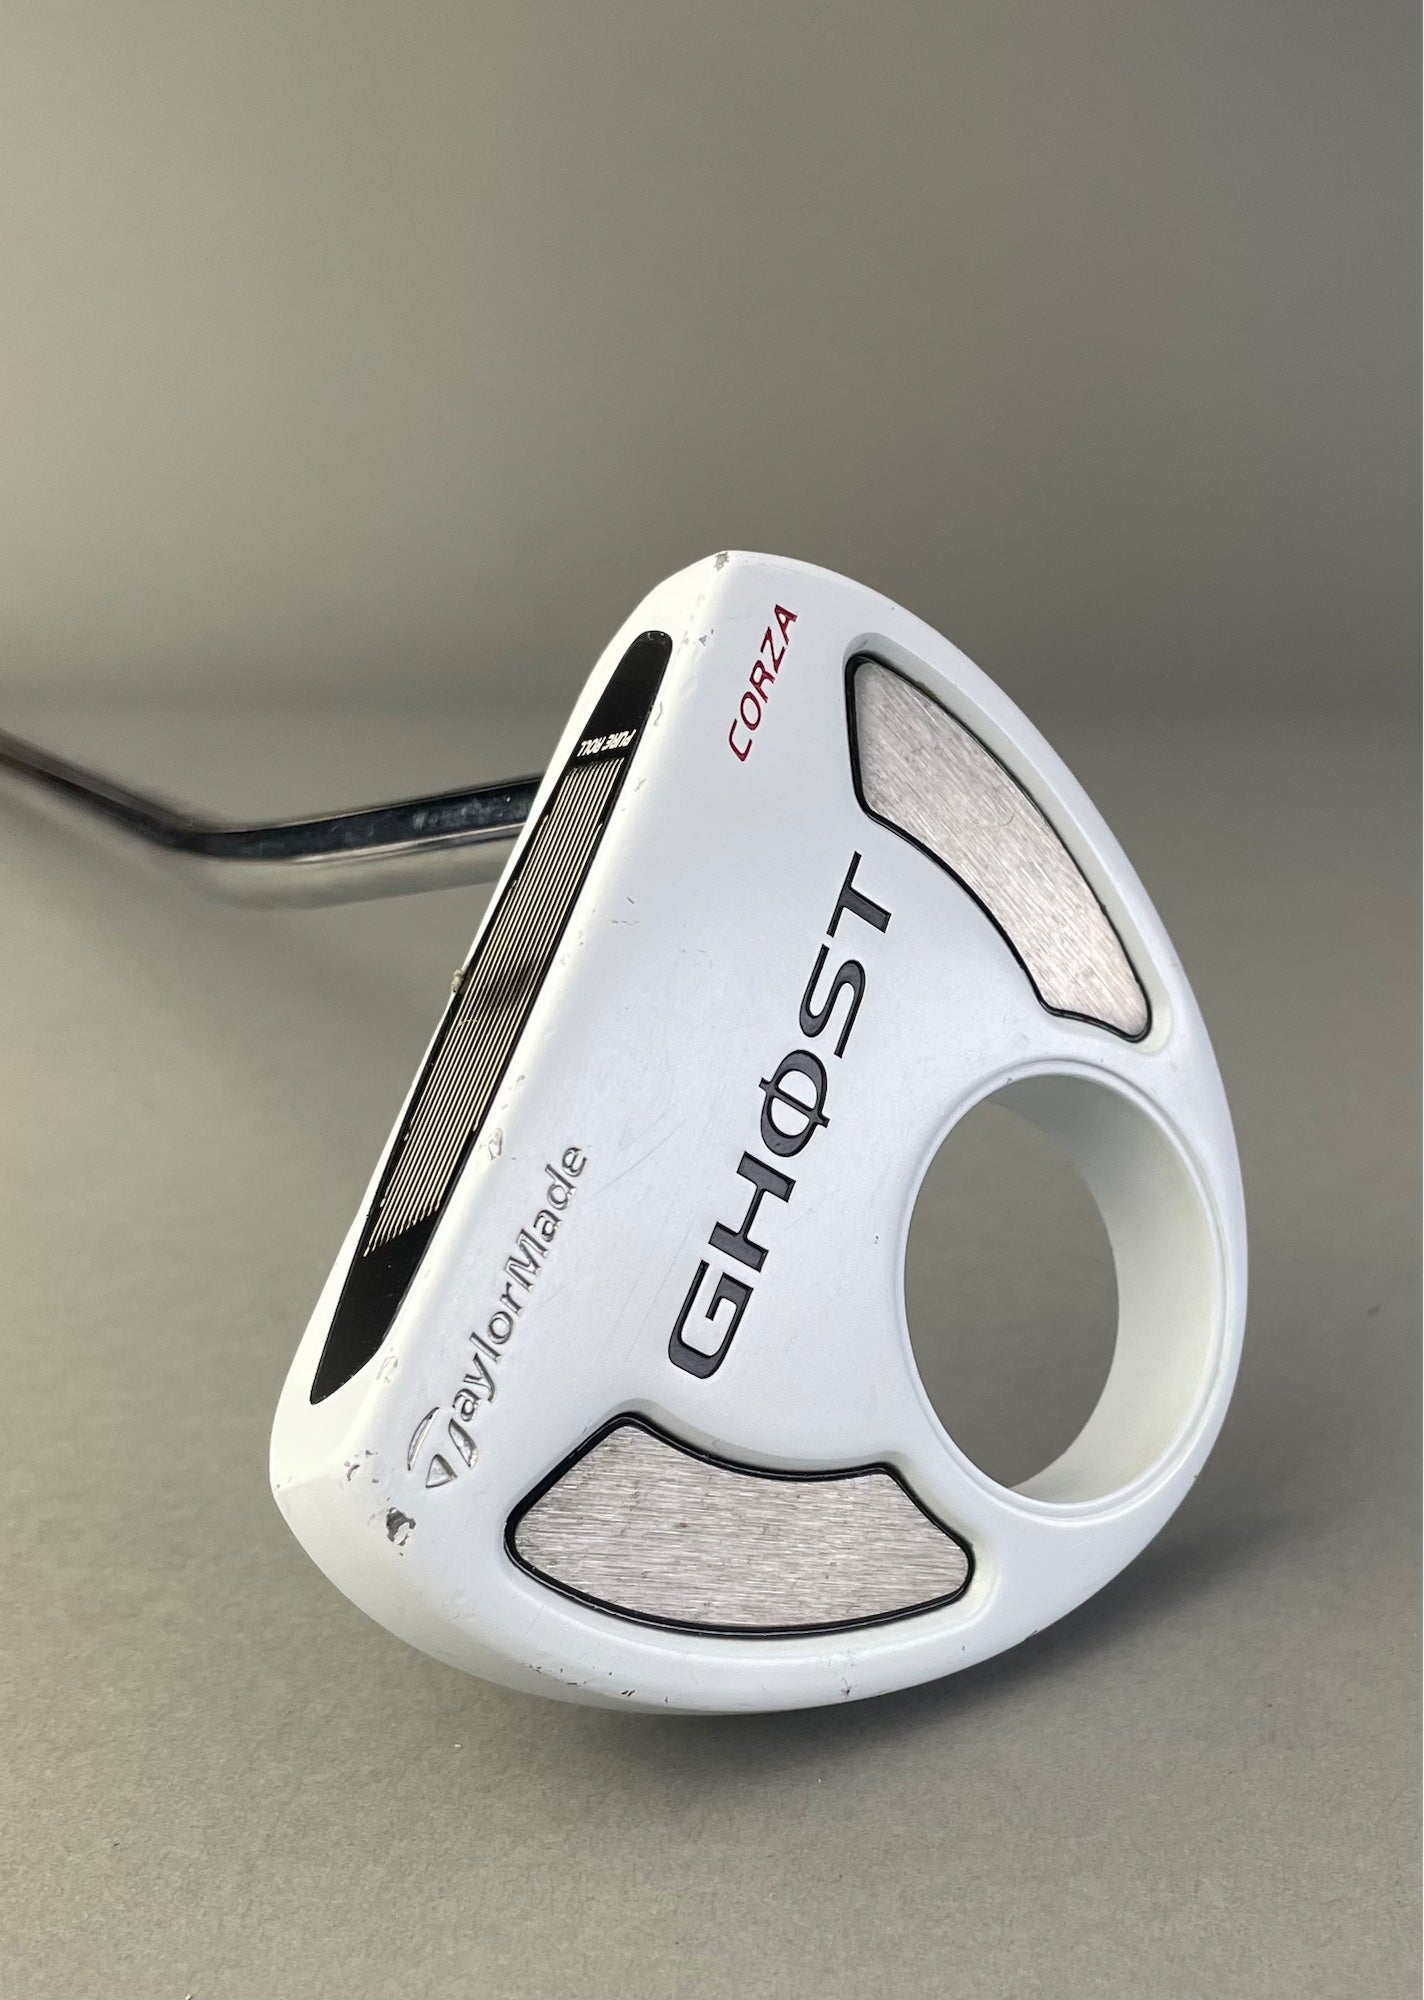 TaylorMade Corza Ghost Putter | SidelineSwap